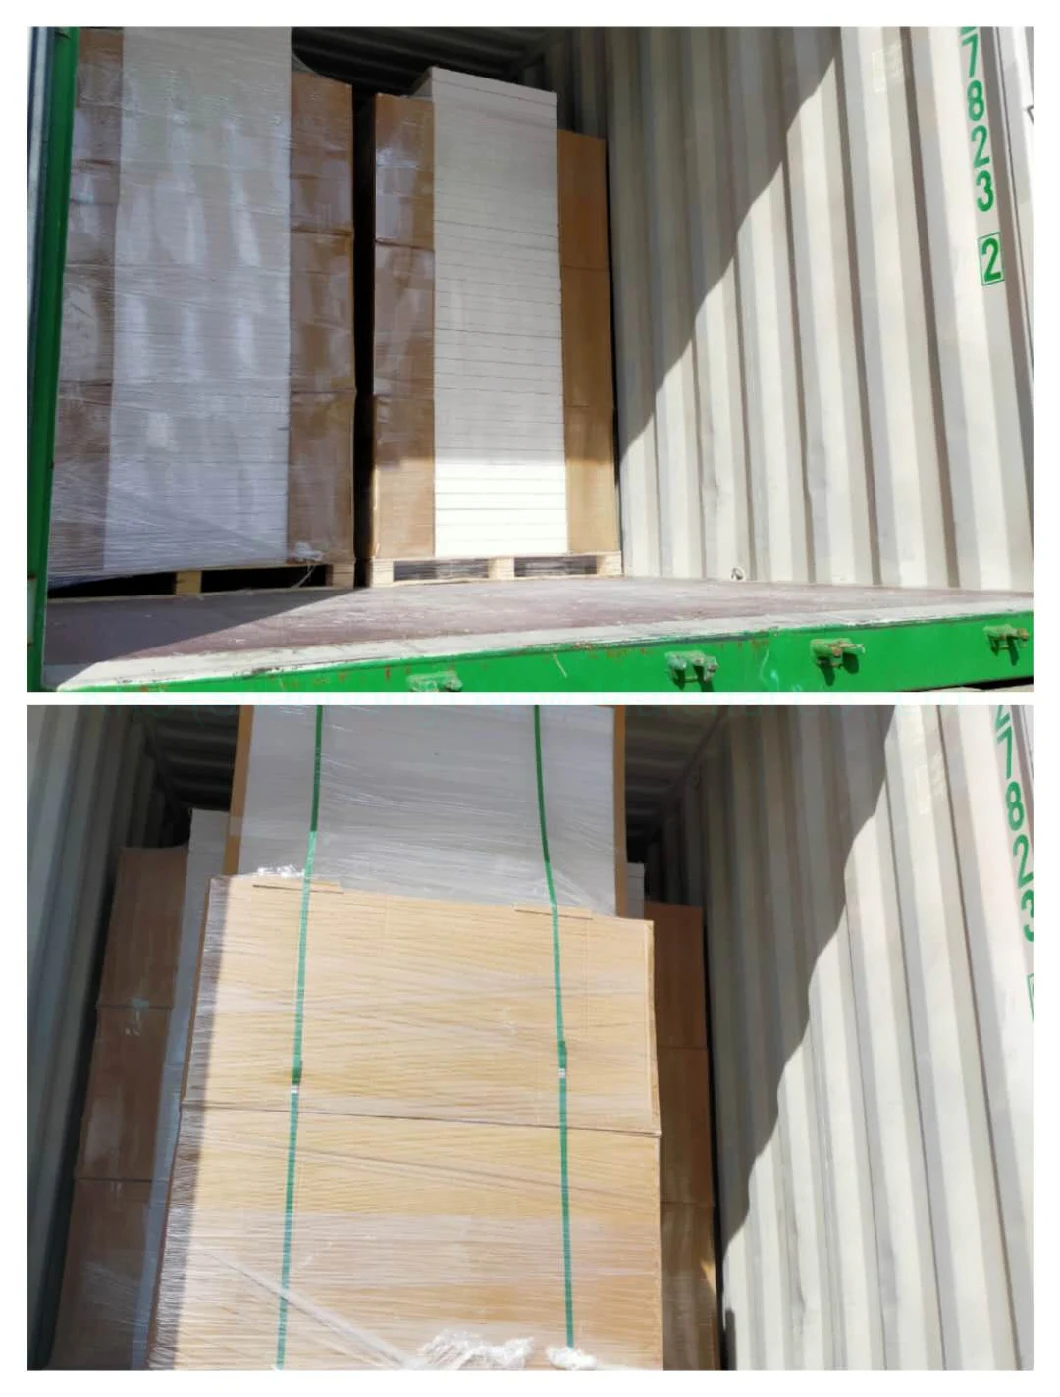 External Wall Insulation Material Calcium Silicate Board ISO9001